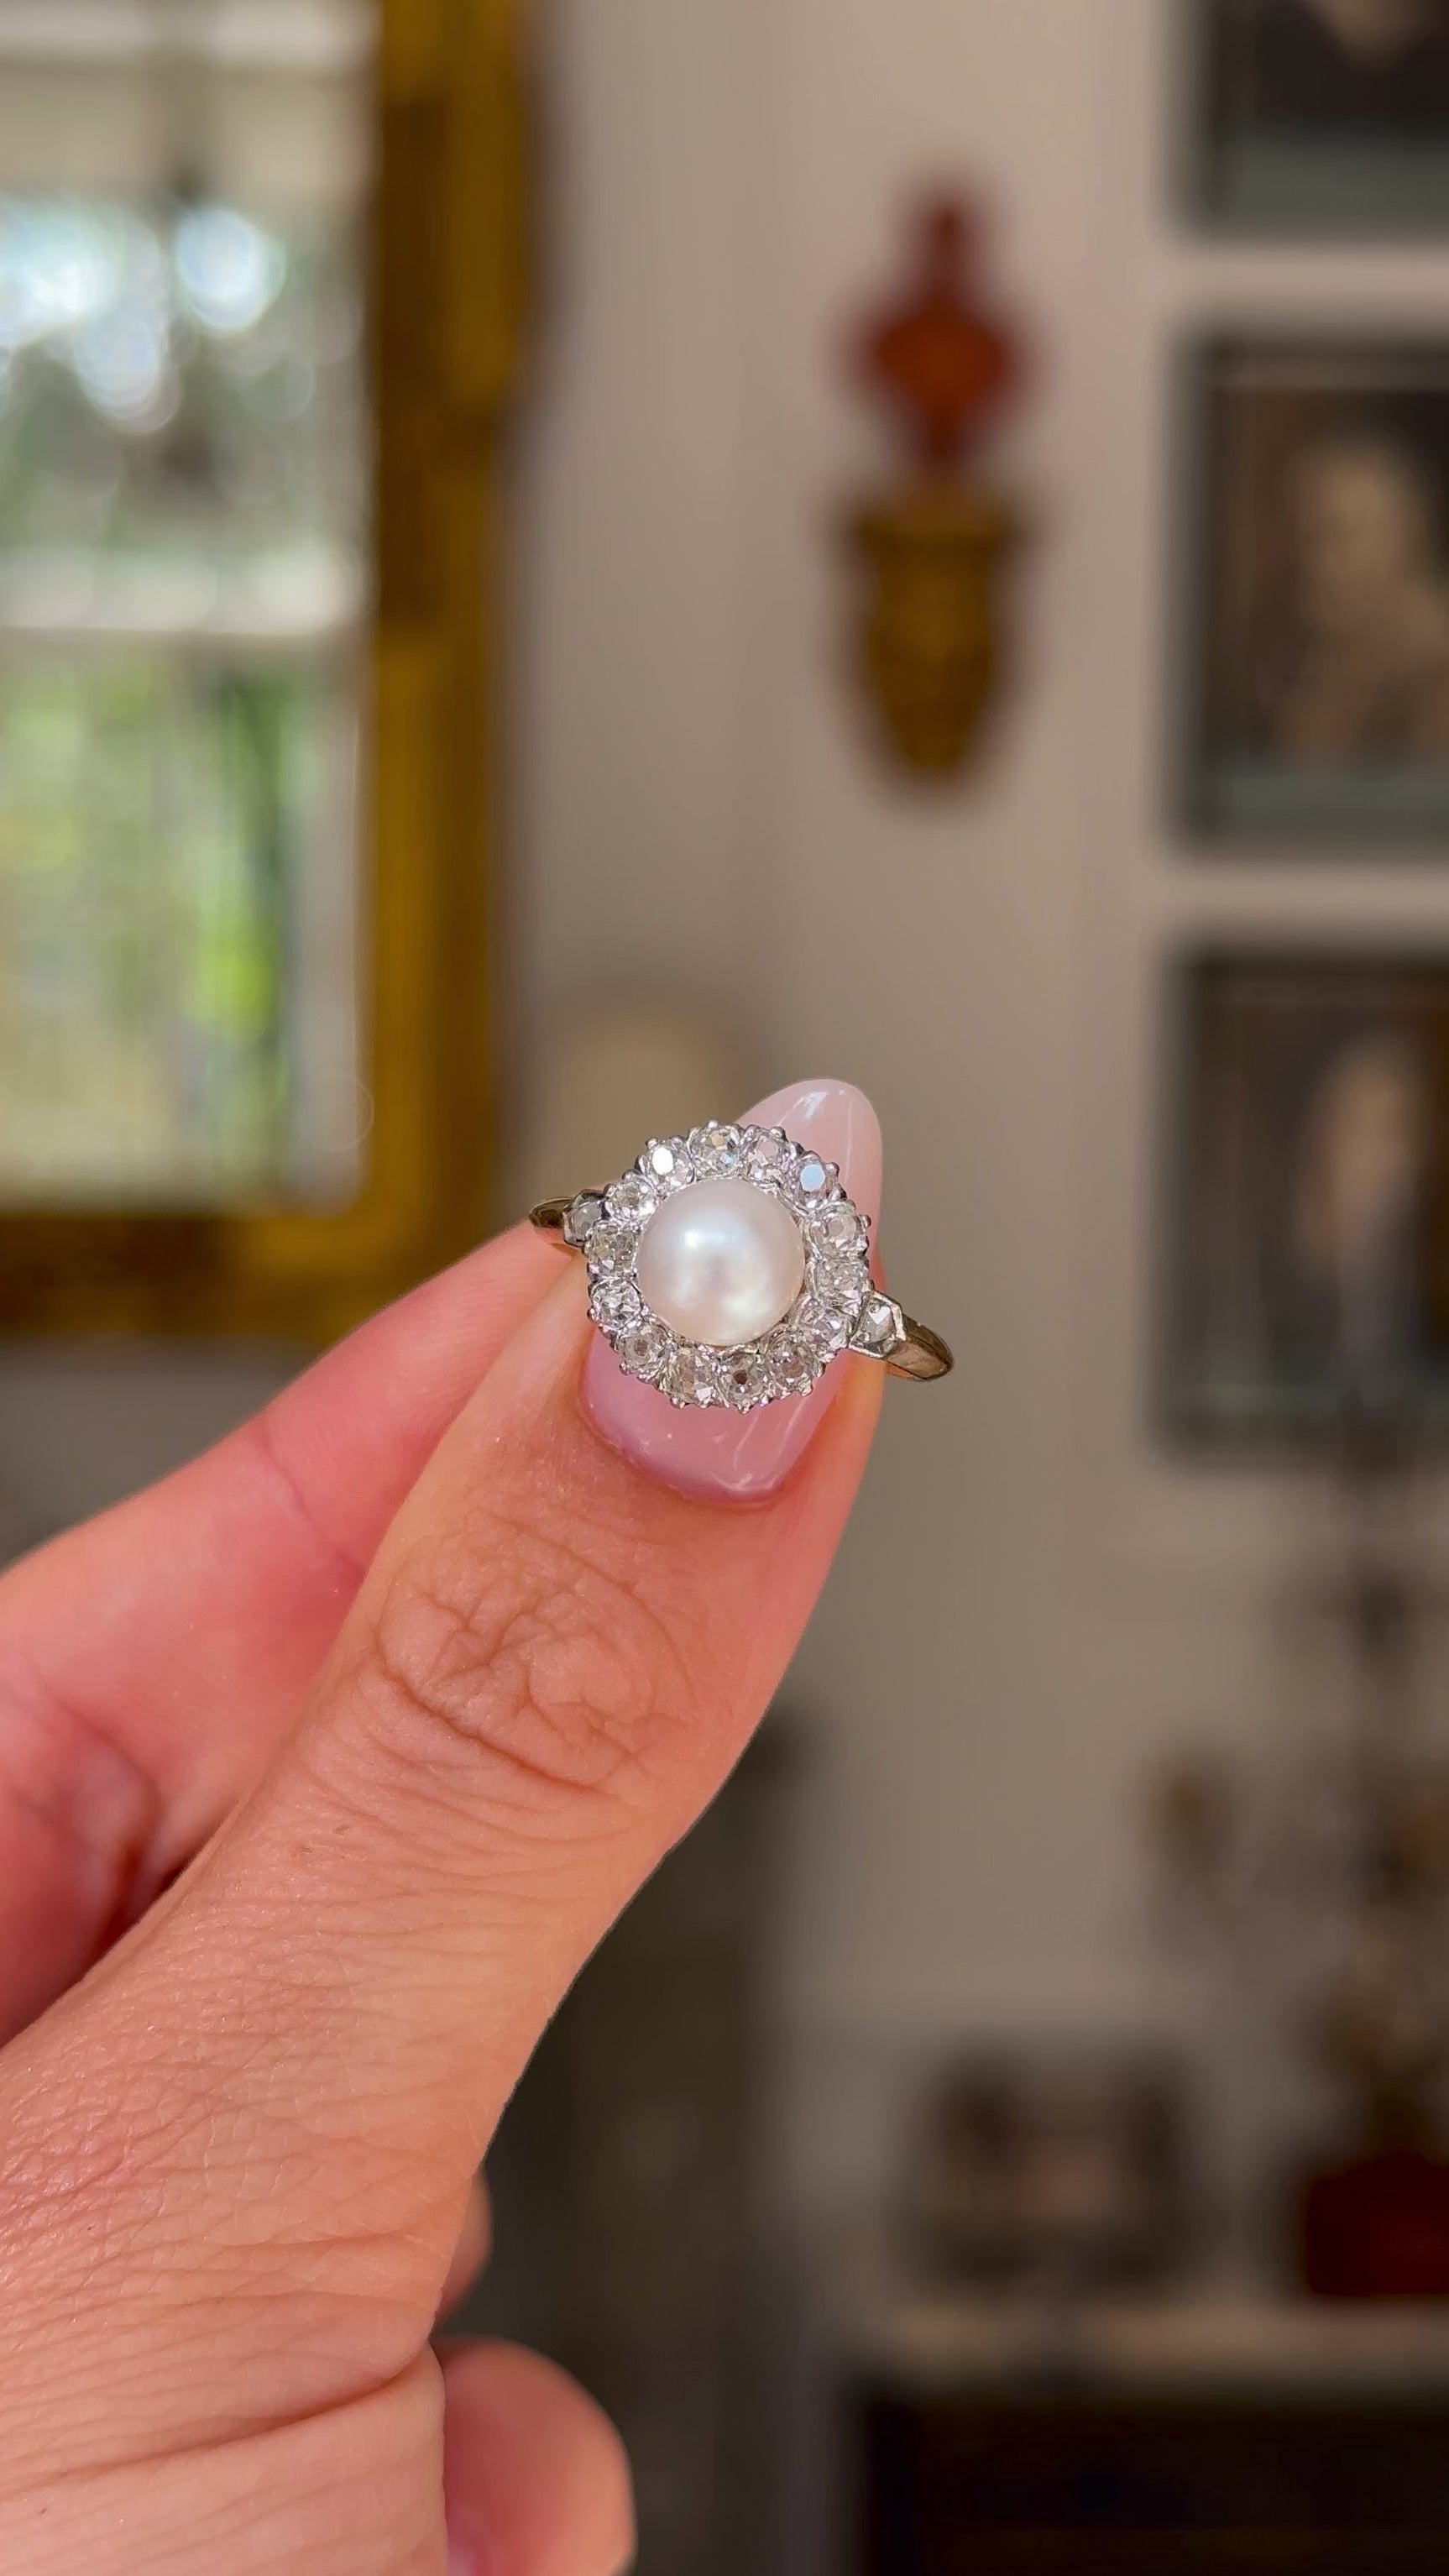 Antique pearl and diamond cluster ring held in fingers and moved around to give perspective.